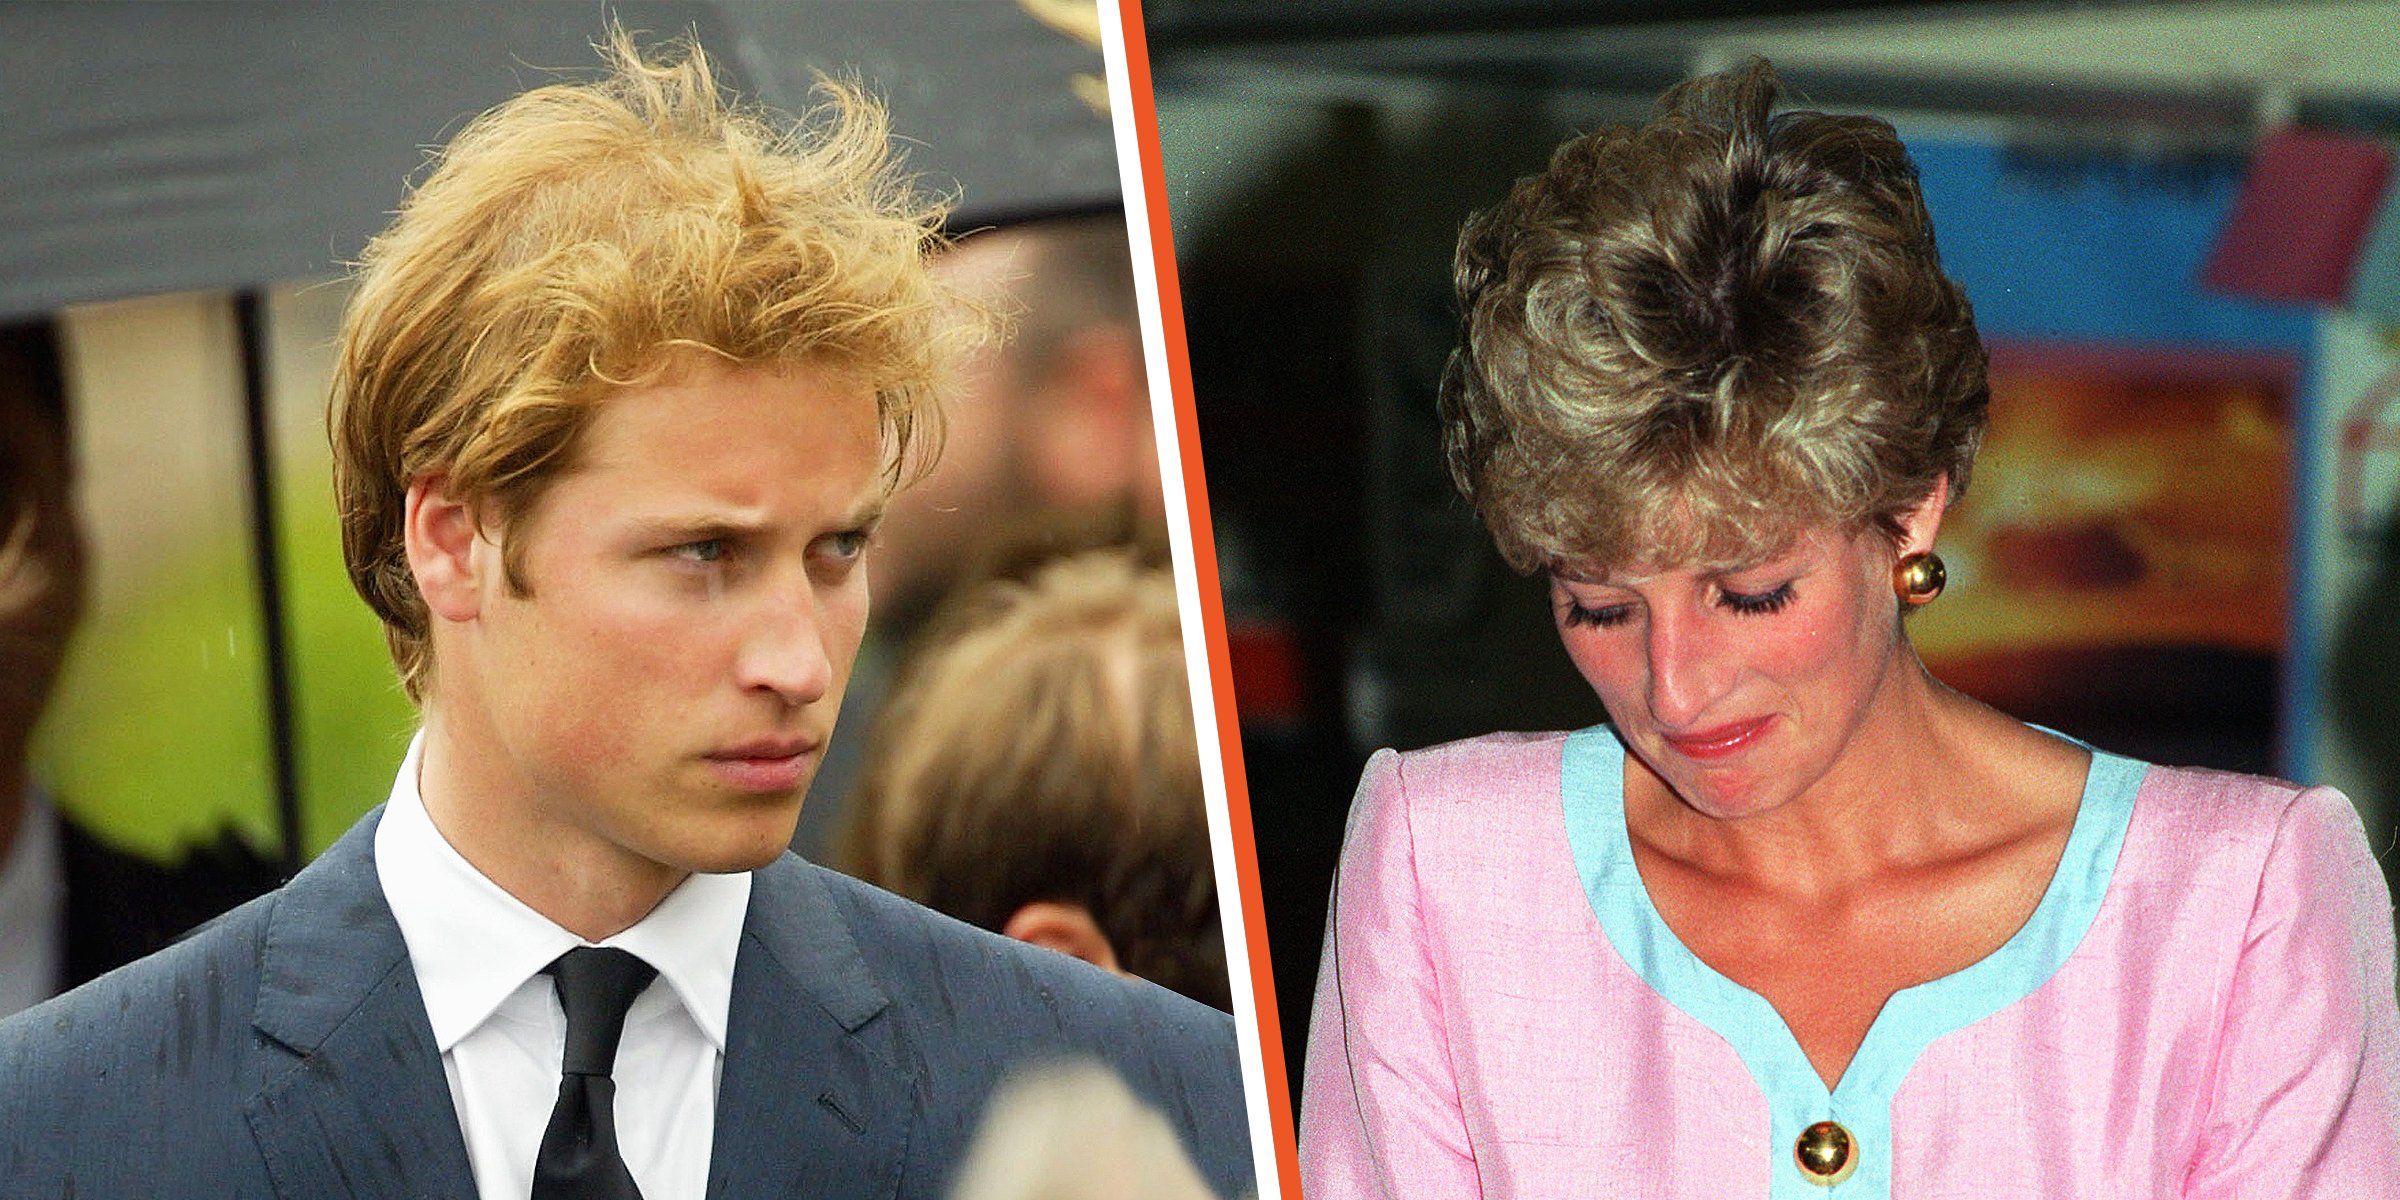  Prince William | Lady Diana | Source: Getty Images